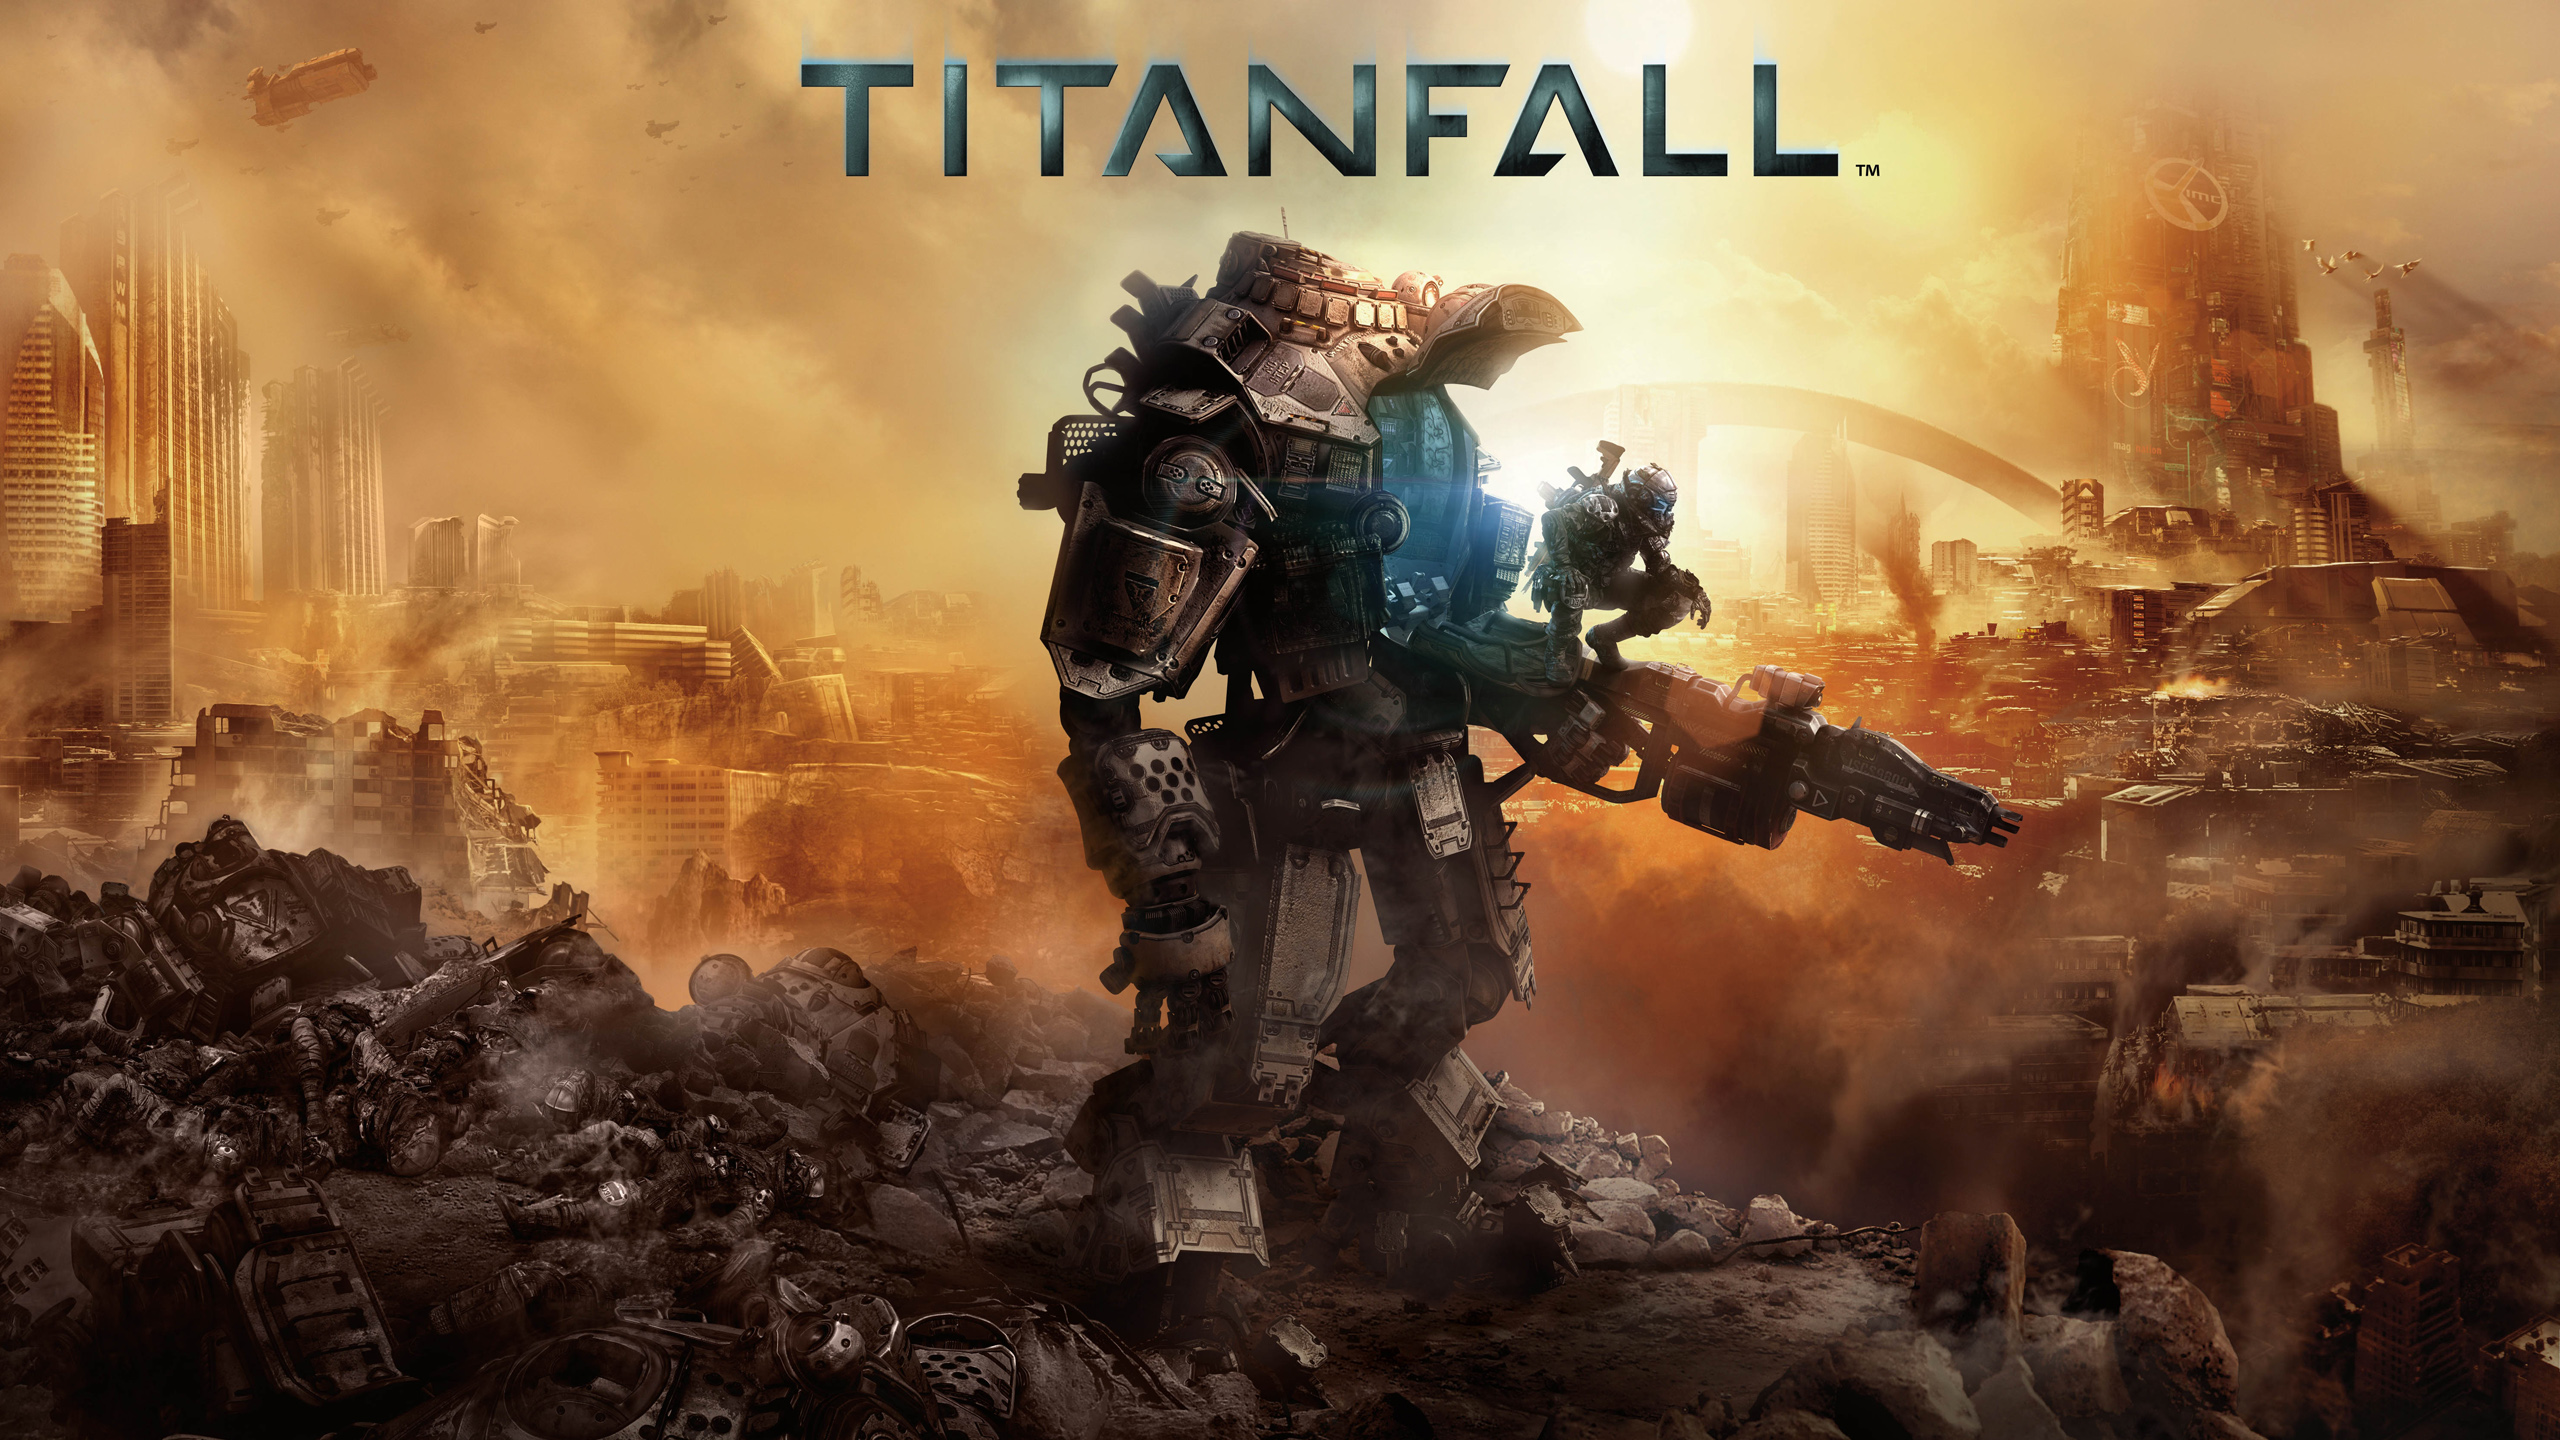 Titanfall 2014 Game Wallpapers HD Wallpapers 2560x1440